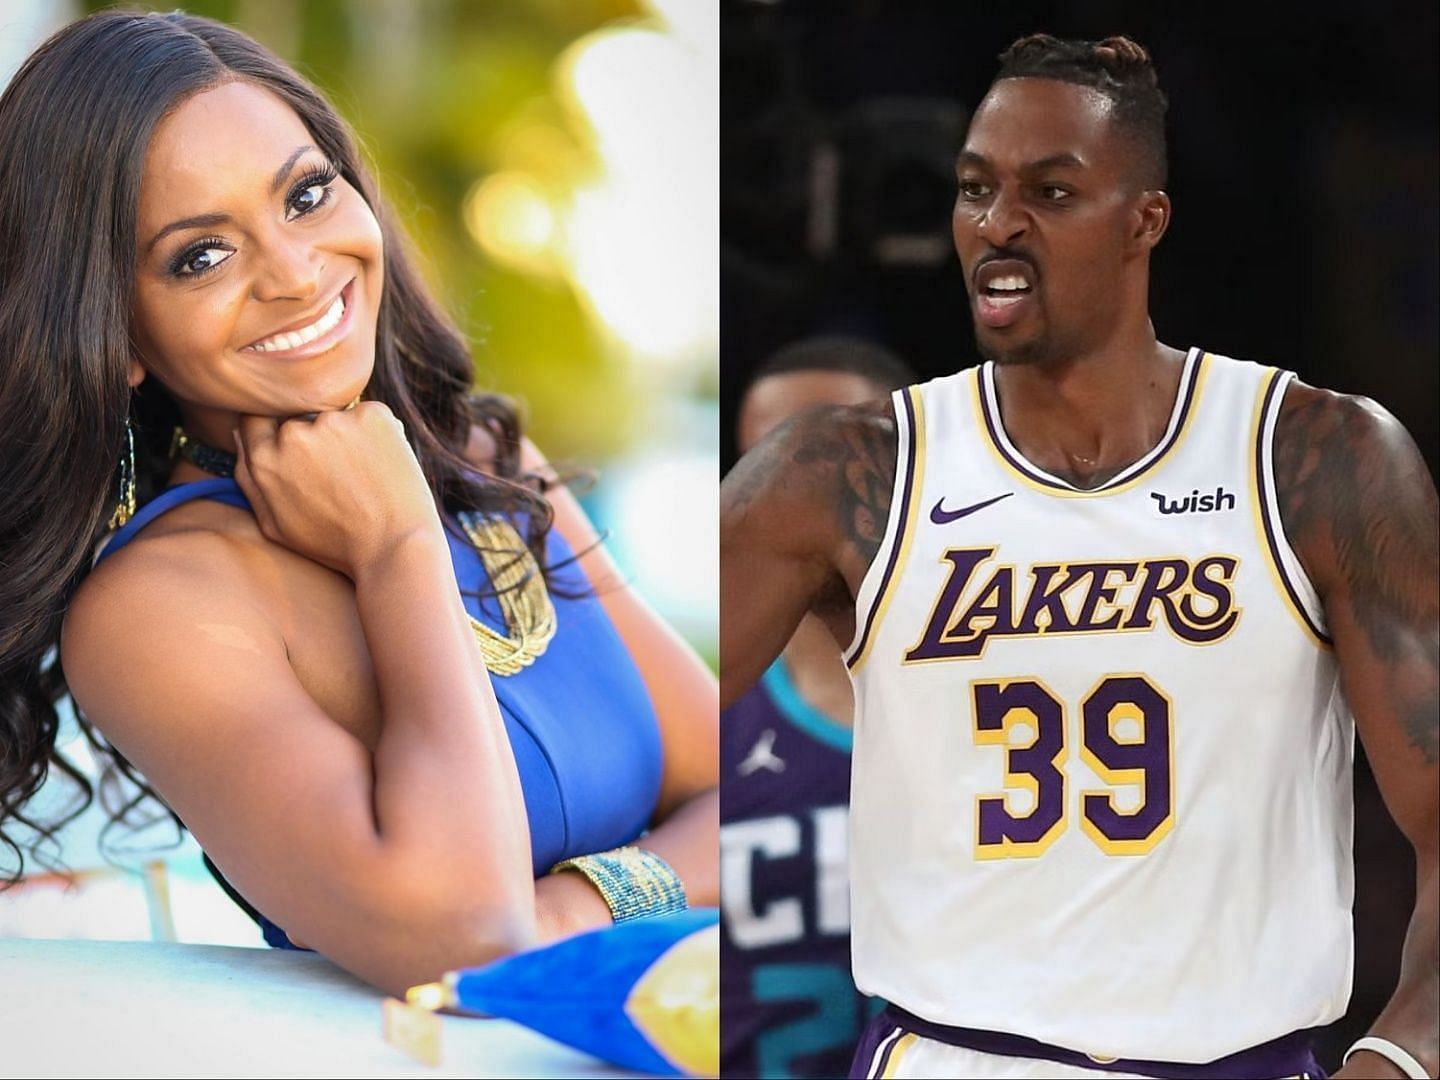 Royce Reed and Dwight Howard have one son together born in 2007. 